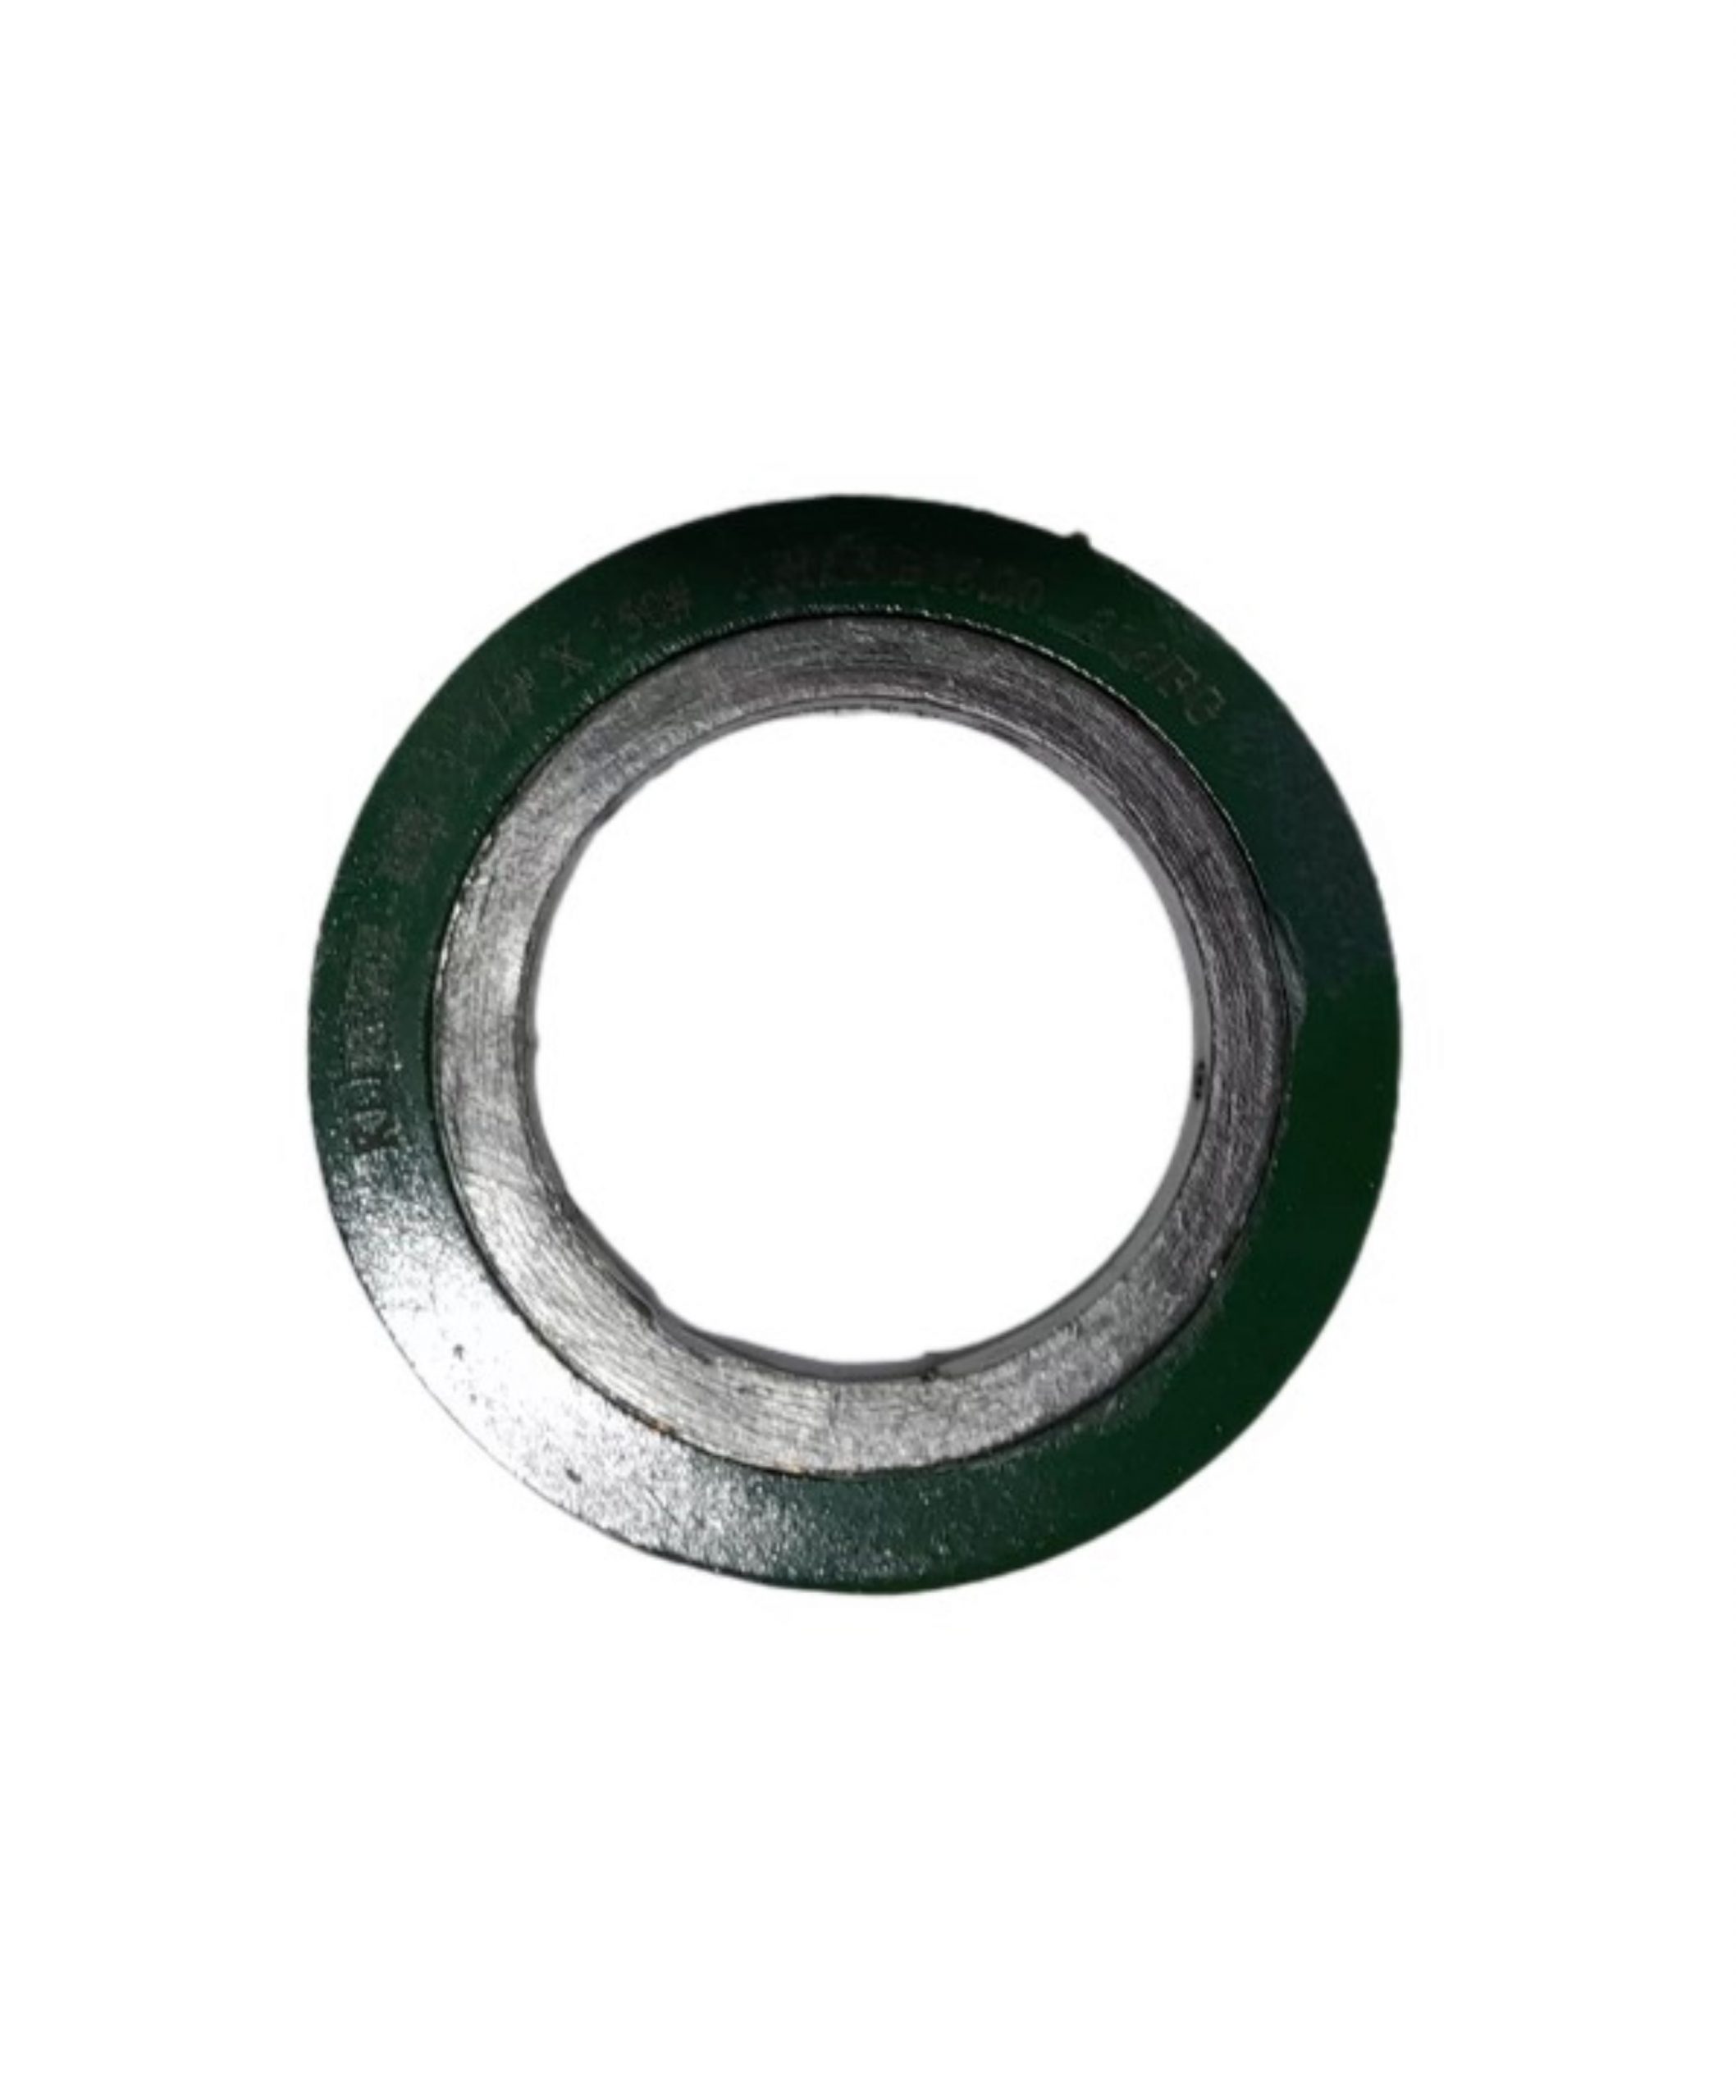 SPIRAL WOUND GASKET 2 Inches CLASS 150 SS 316L from Gas Equipment Company Llc Abu Dhabi, UNITED ARAB EMIRATES